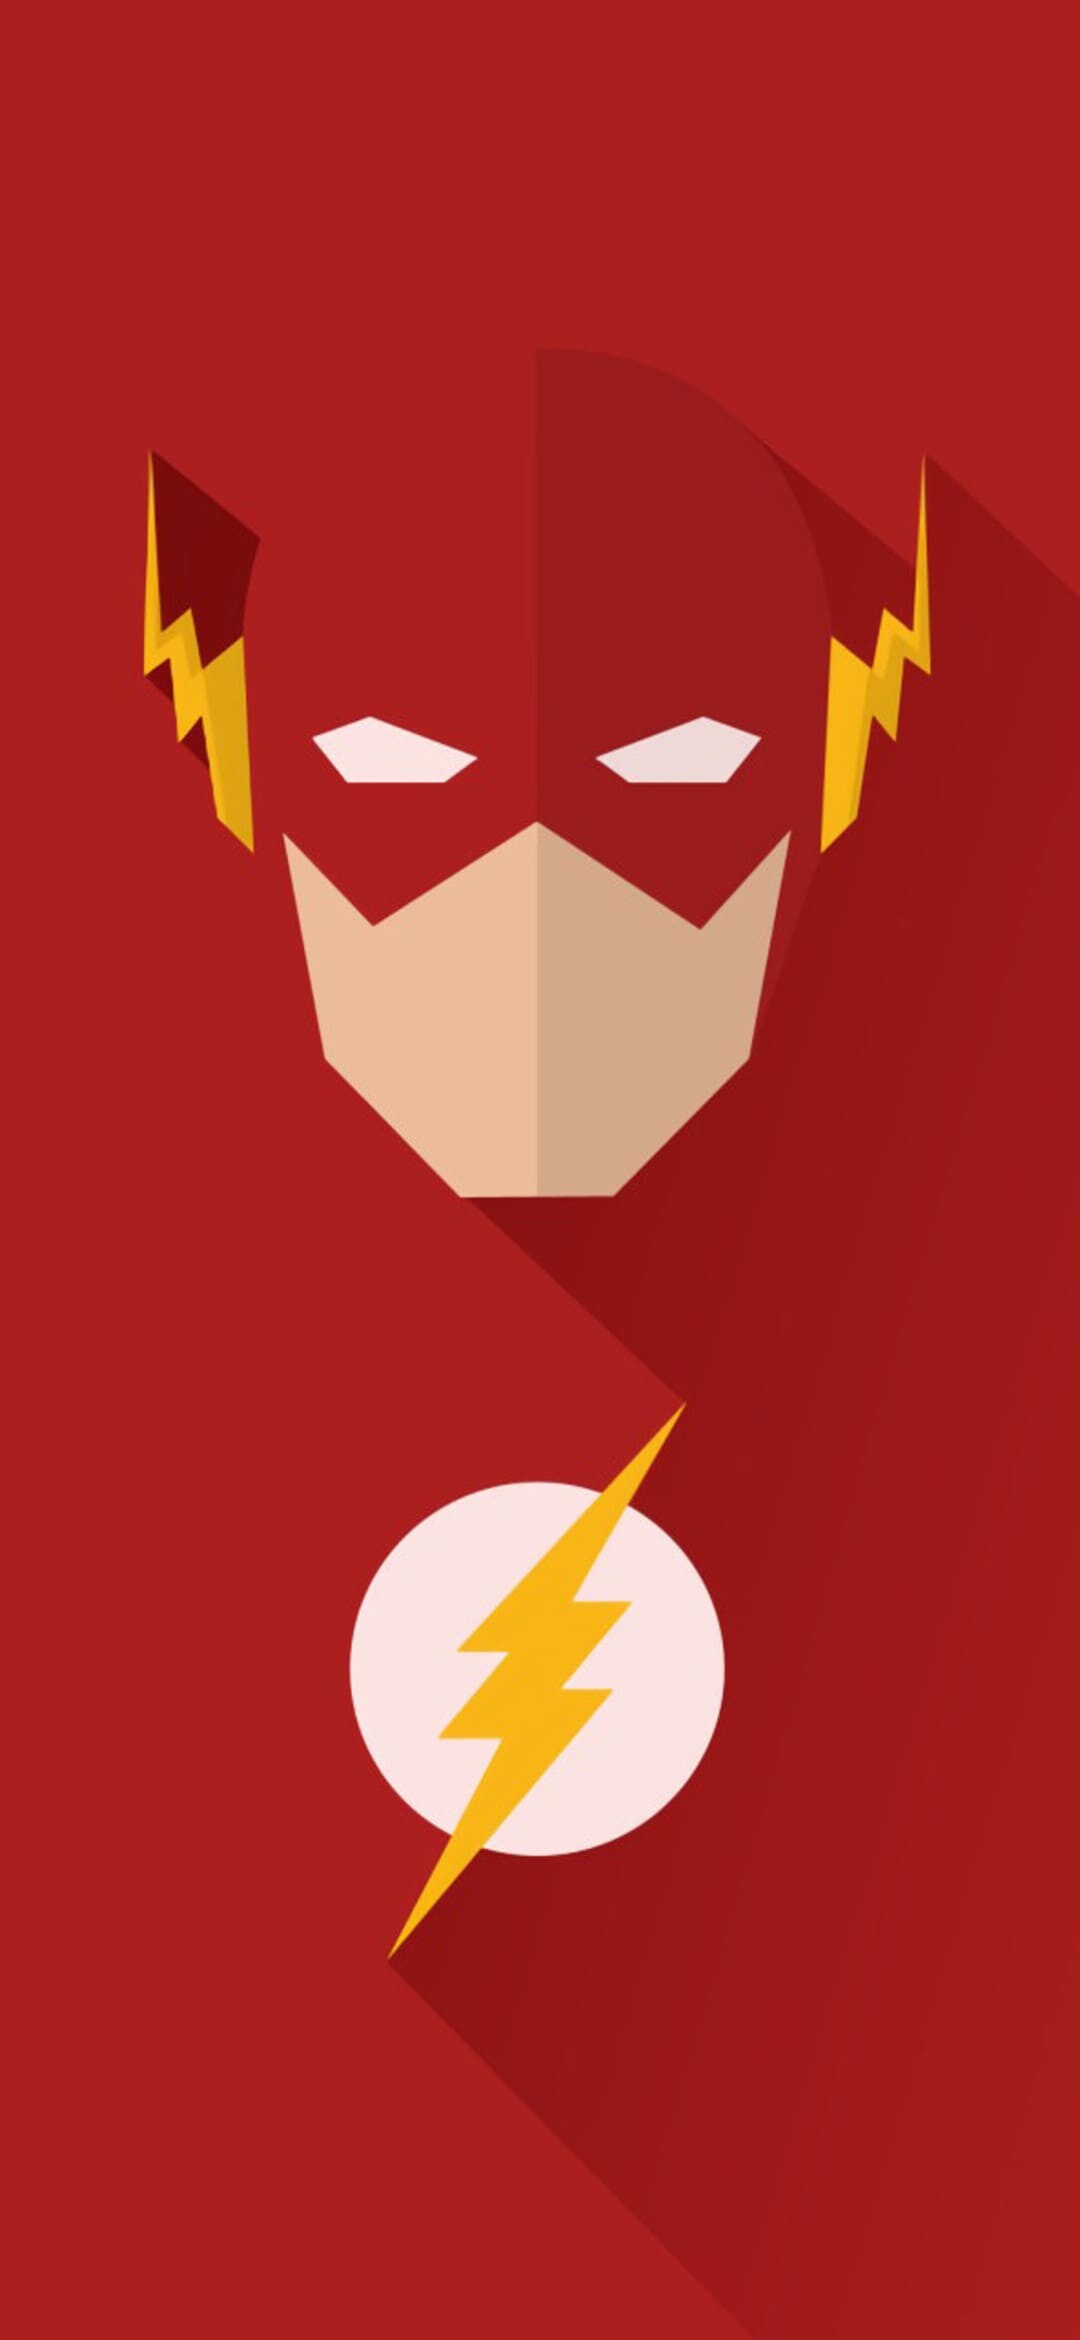 The Flash (2022): Jay Garrick, Barry Allen and Wally West, “The Fastest Man Alive”. 1080x2340 HD Wallpaper.